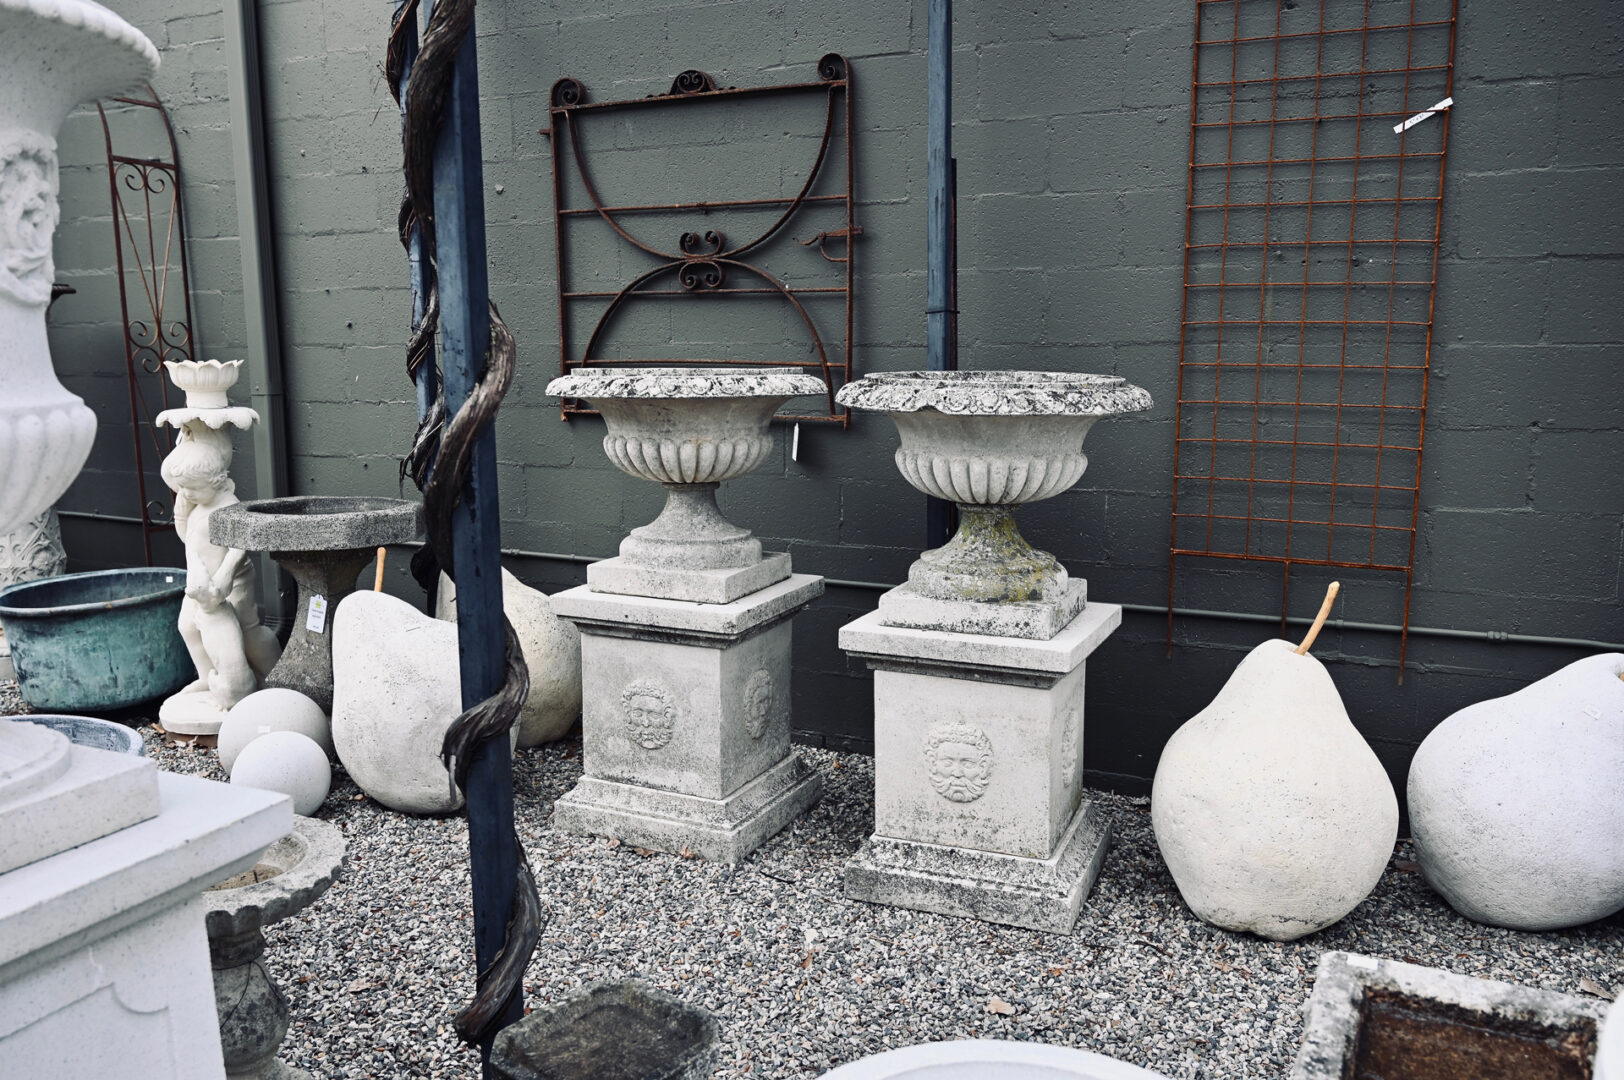 Pair of Large Weathered Urns on Pedestals